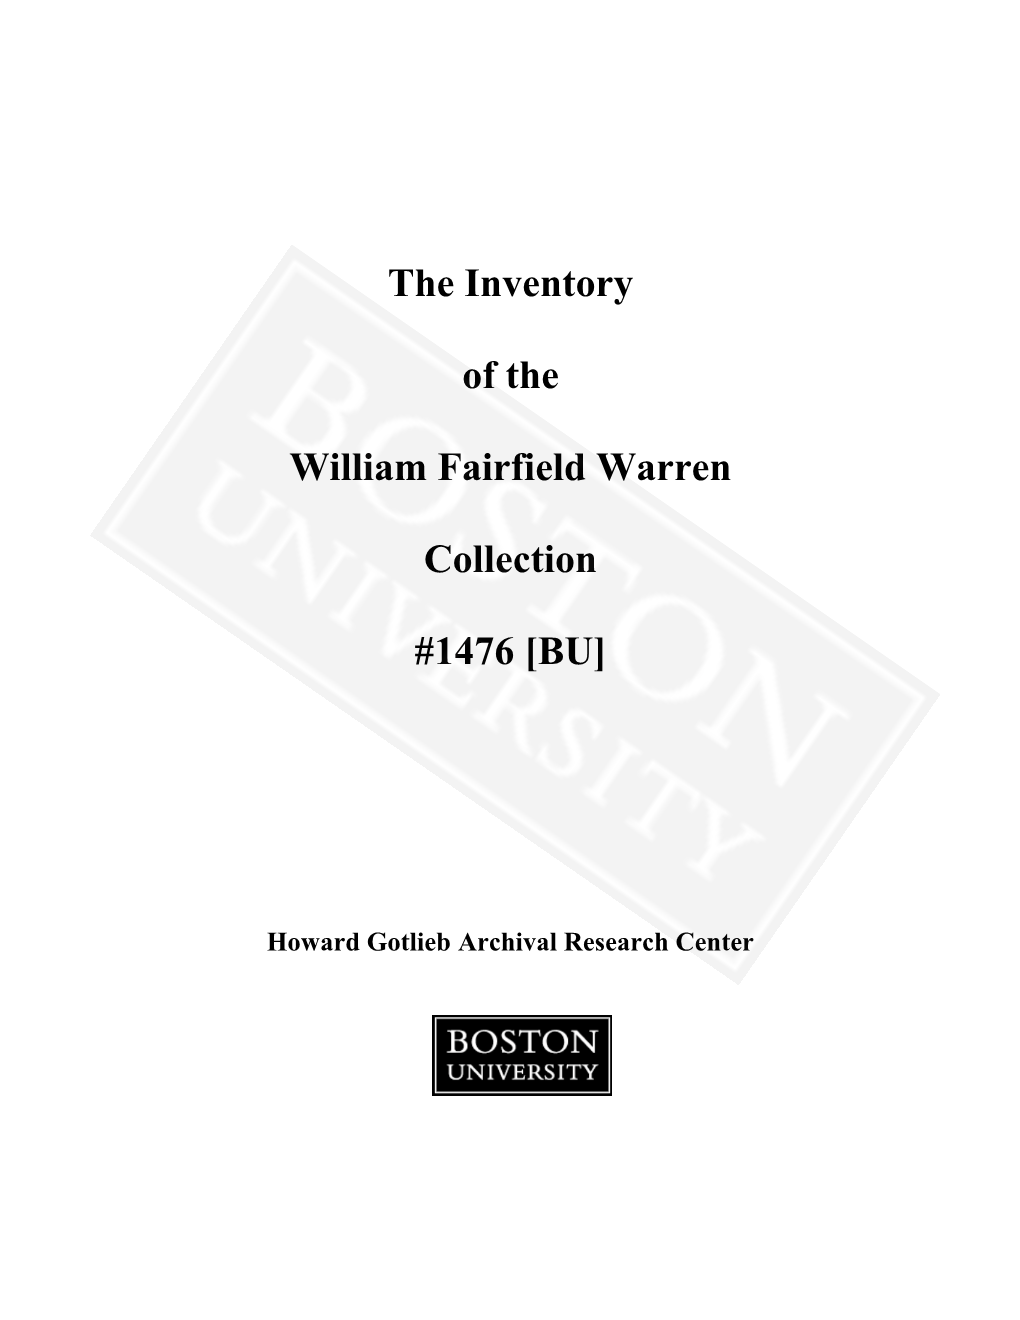 The Inventory of the William Fairfield Warren Collection #1476 [BU]